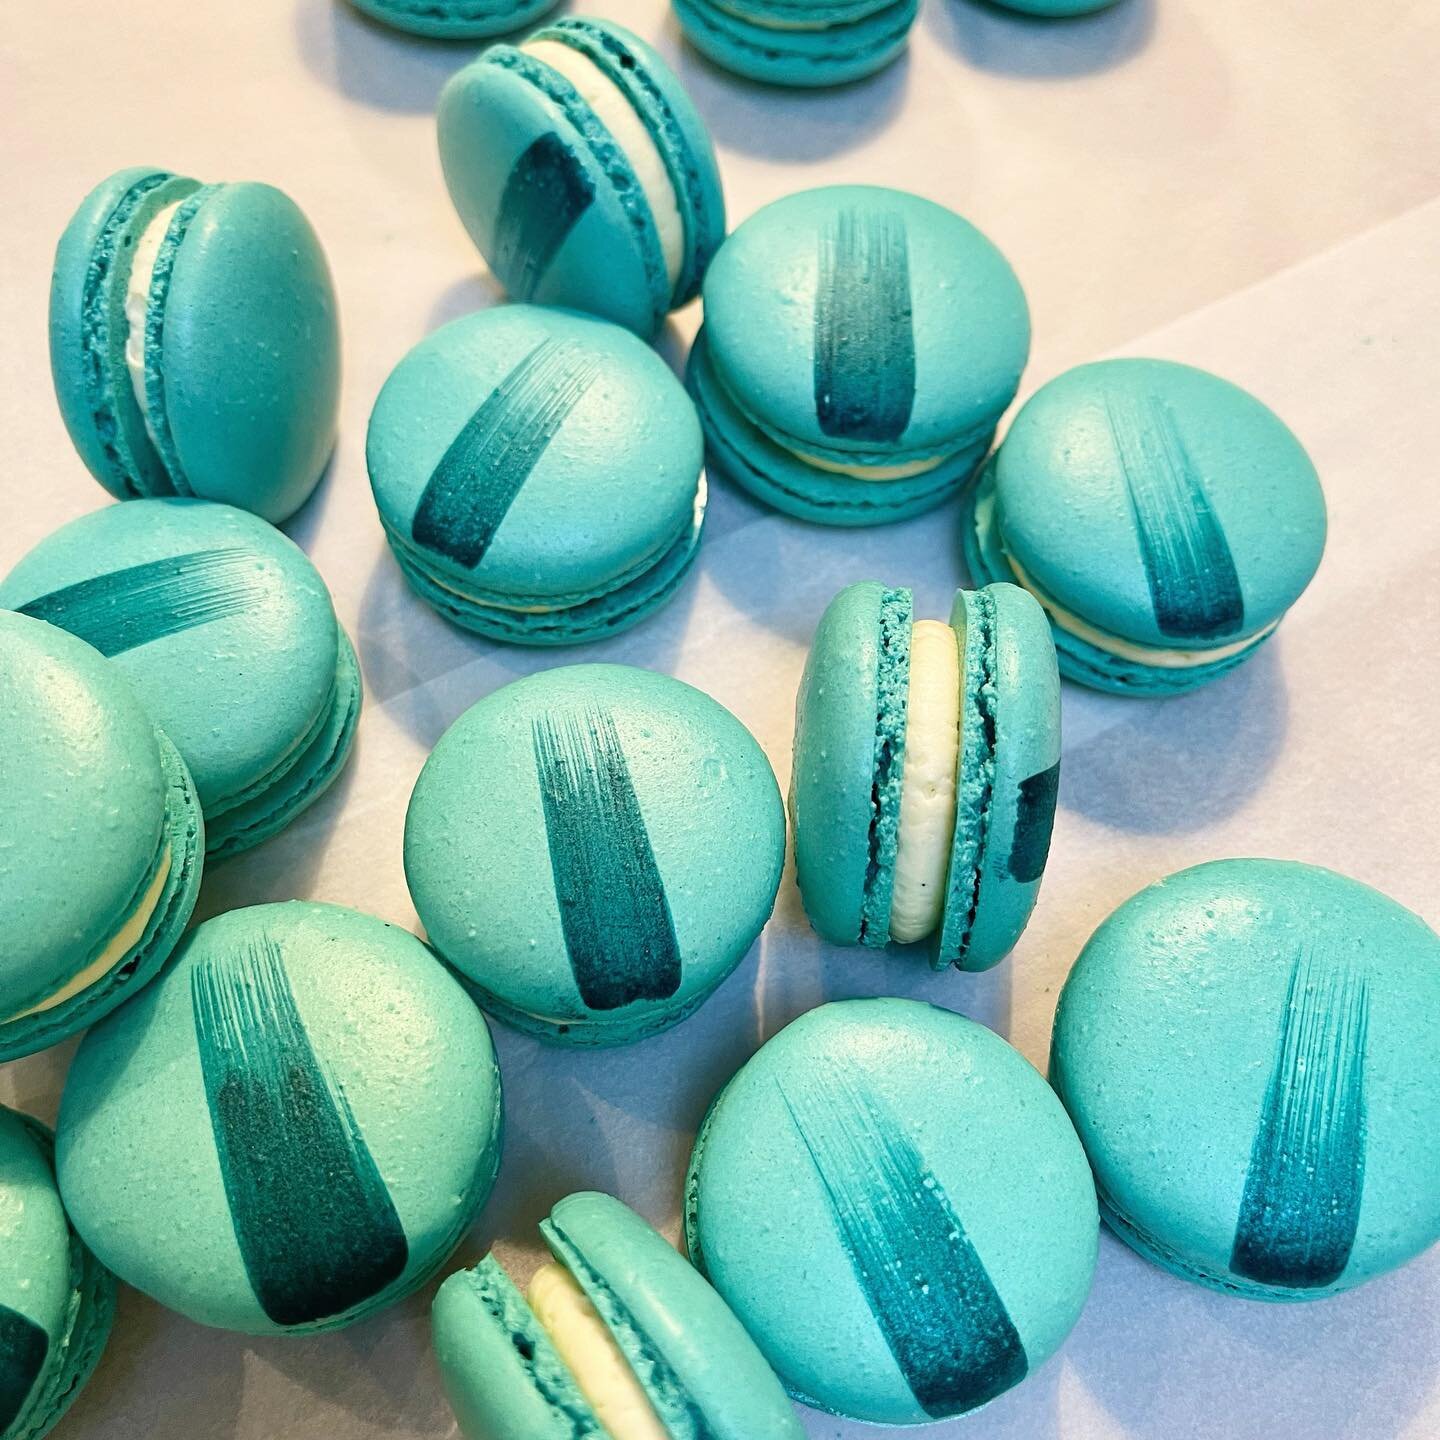 Custom cupcakes &amp; macarons made to match your logo 💫

Thanks @nexiaperth for supporting local small business! 🌟